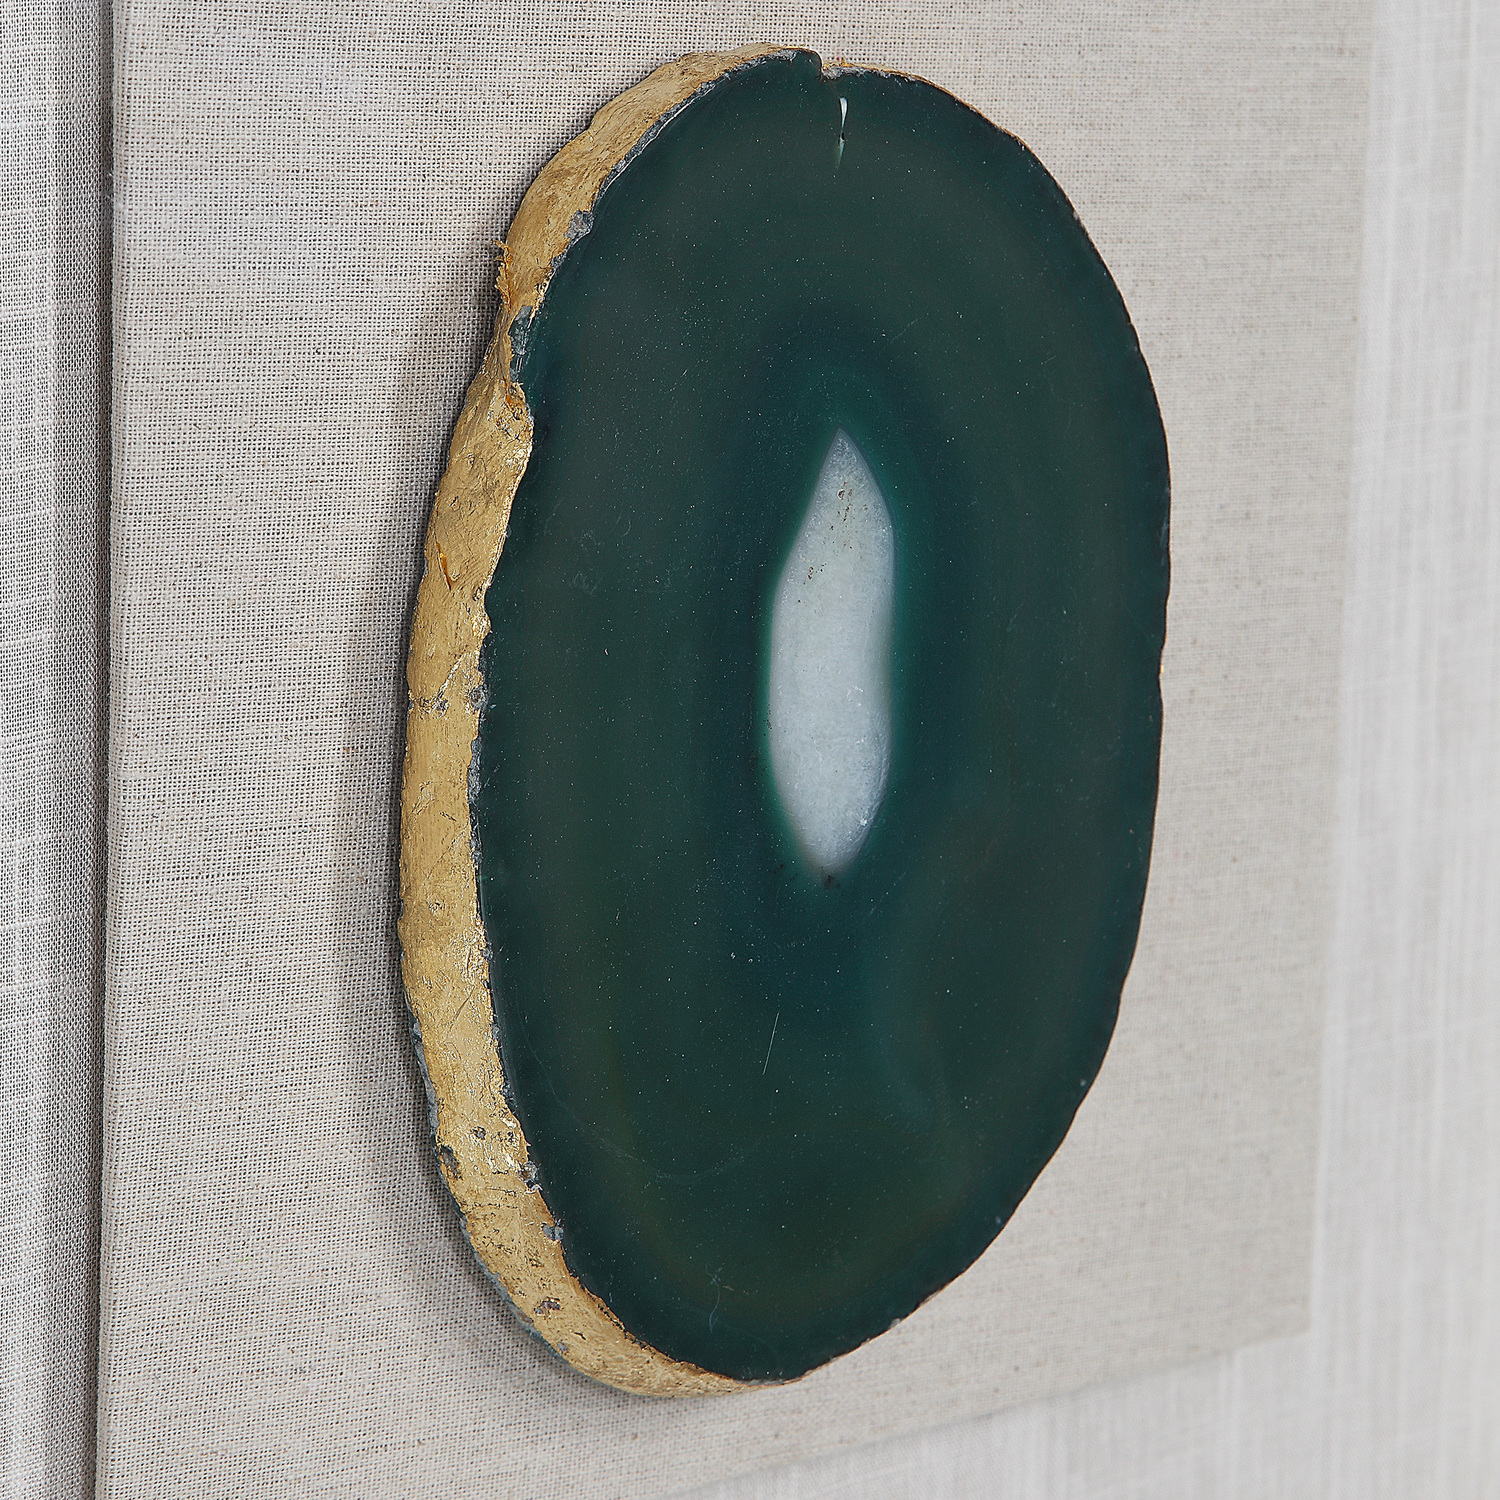 shower steam cubicle Uttermost Shadow Box A Pine Wood Shadow Box Featuring A Hand Applied Gold Leaf Finish Showcases A Striking Emerald Green Agate Stone With White Veining, Accented With Hand Painted Gold Edging. Mounted On An Off White Linen Backing.